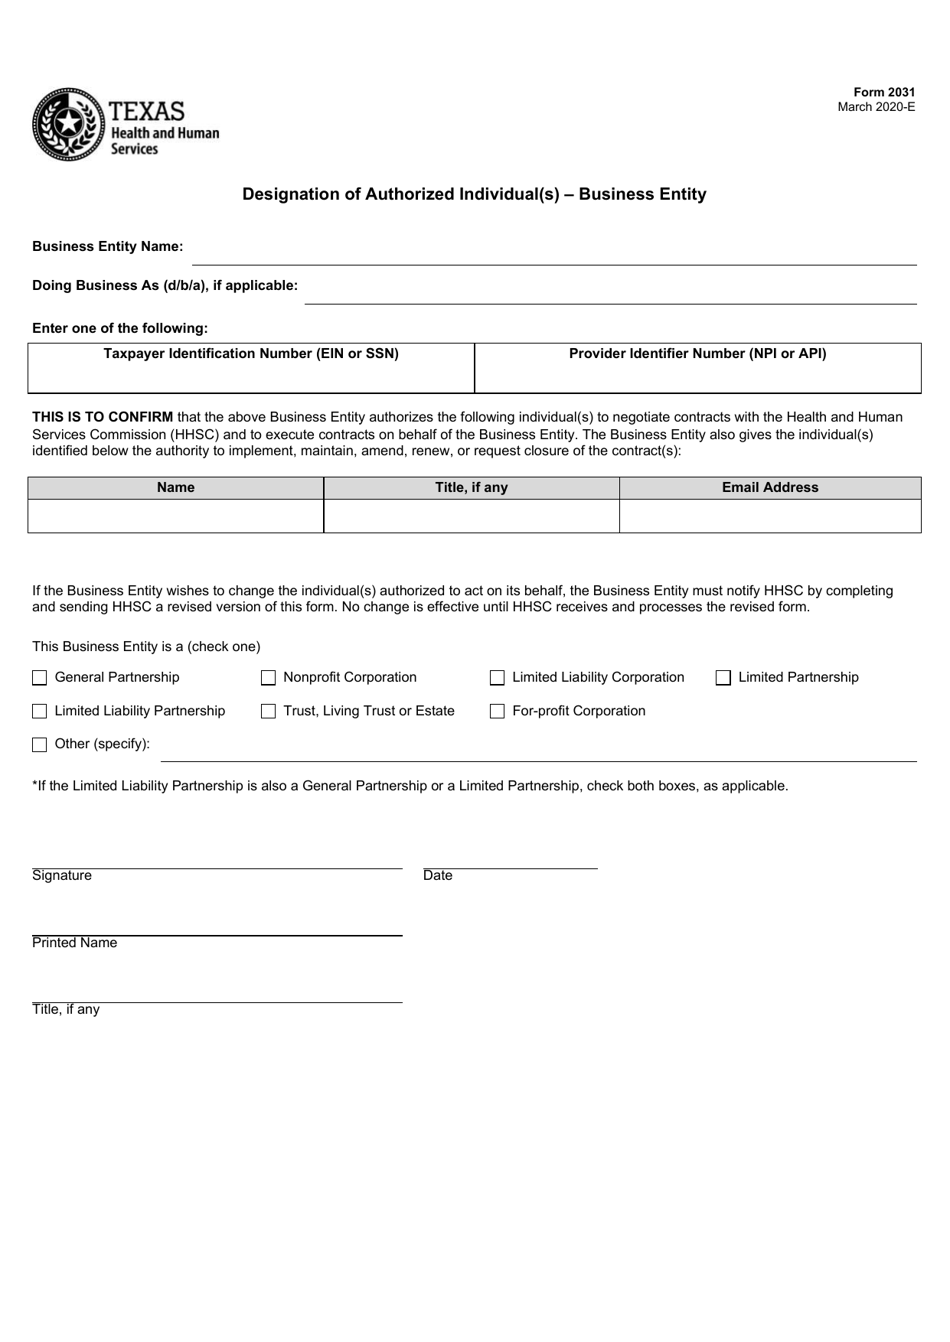 Form 2031 Designation of Authorized Individual(S) - Business Entity - Texas, Page 1